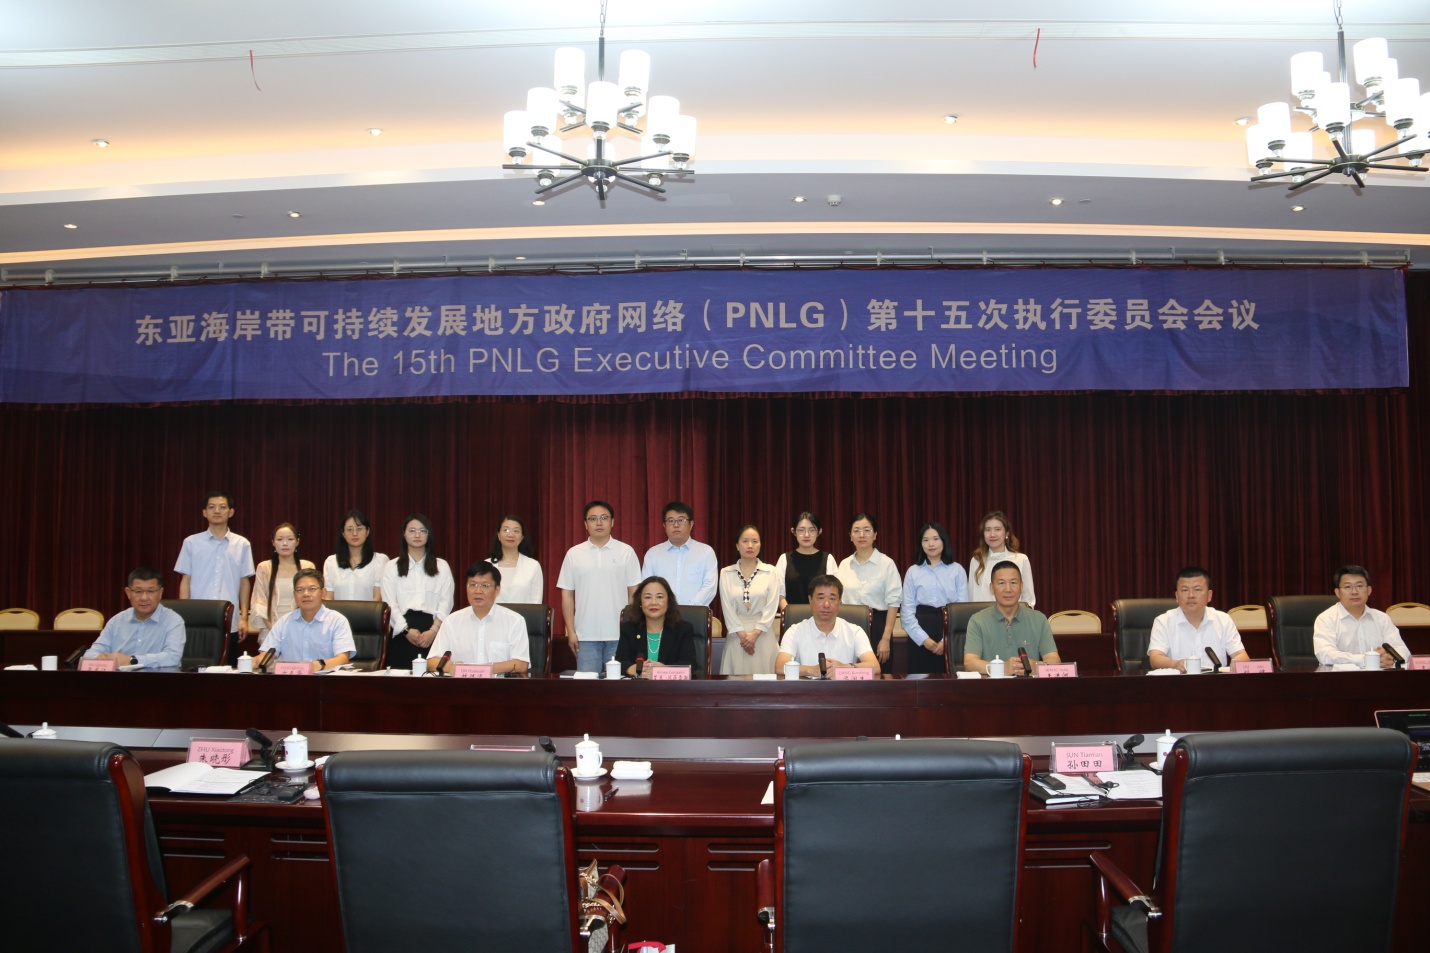 the 15th PNLG Executive Committee Meeting